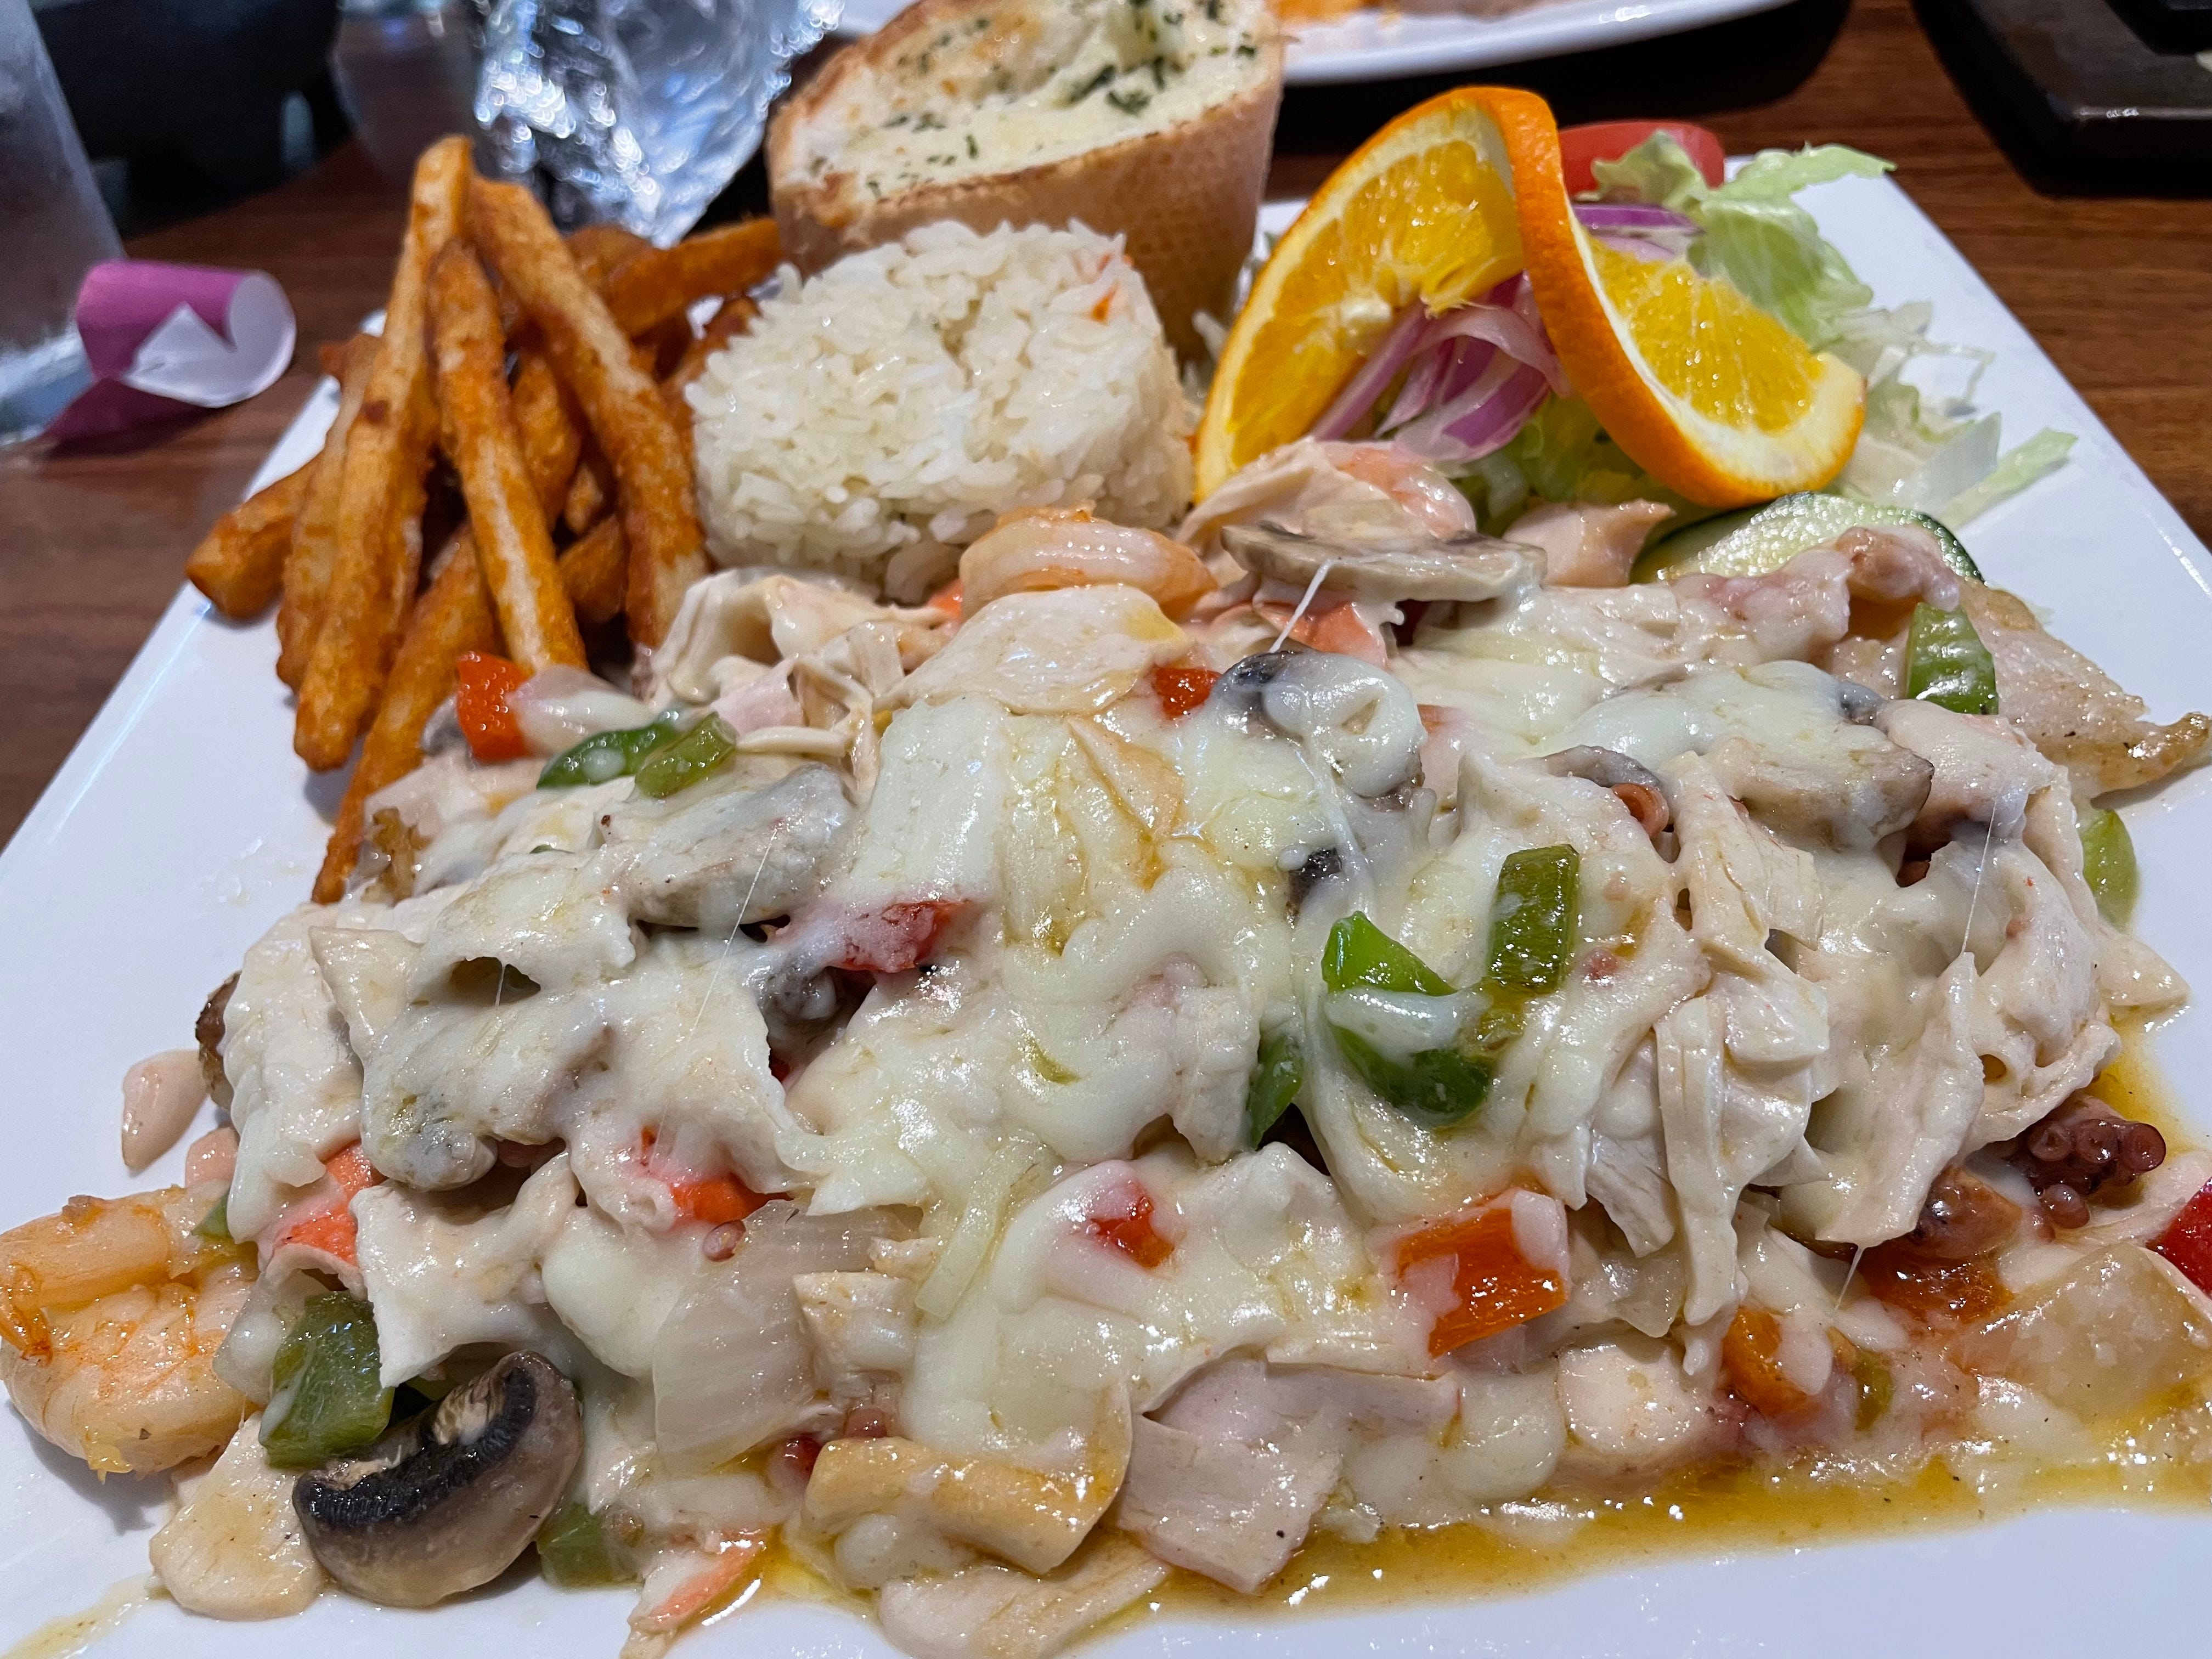 Fish is the focus at Knoxville restaurant Mariscos Pacifico Nayarit